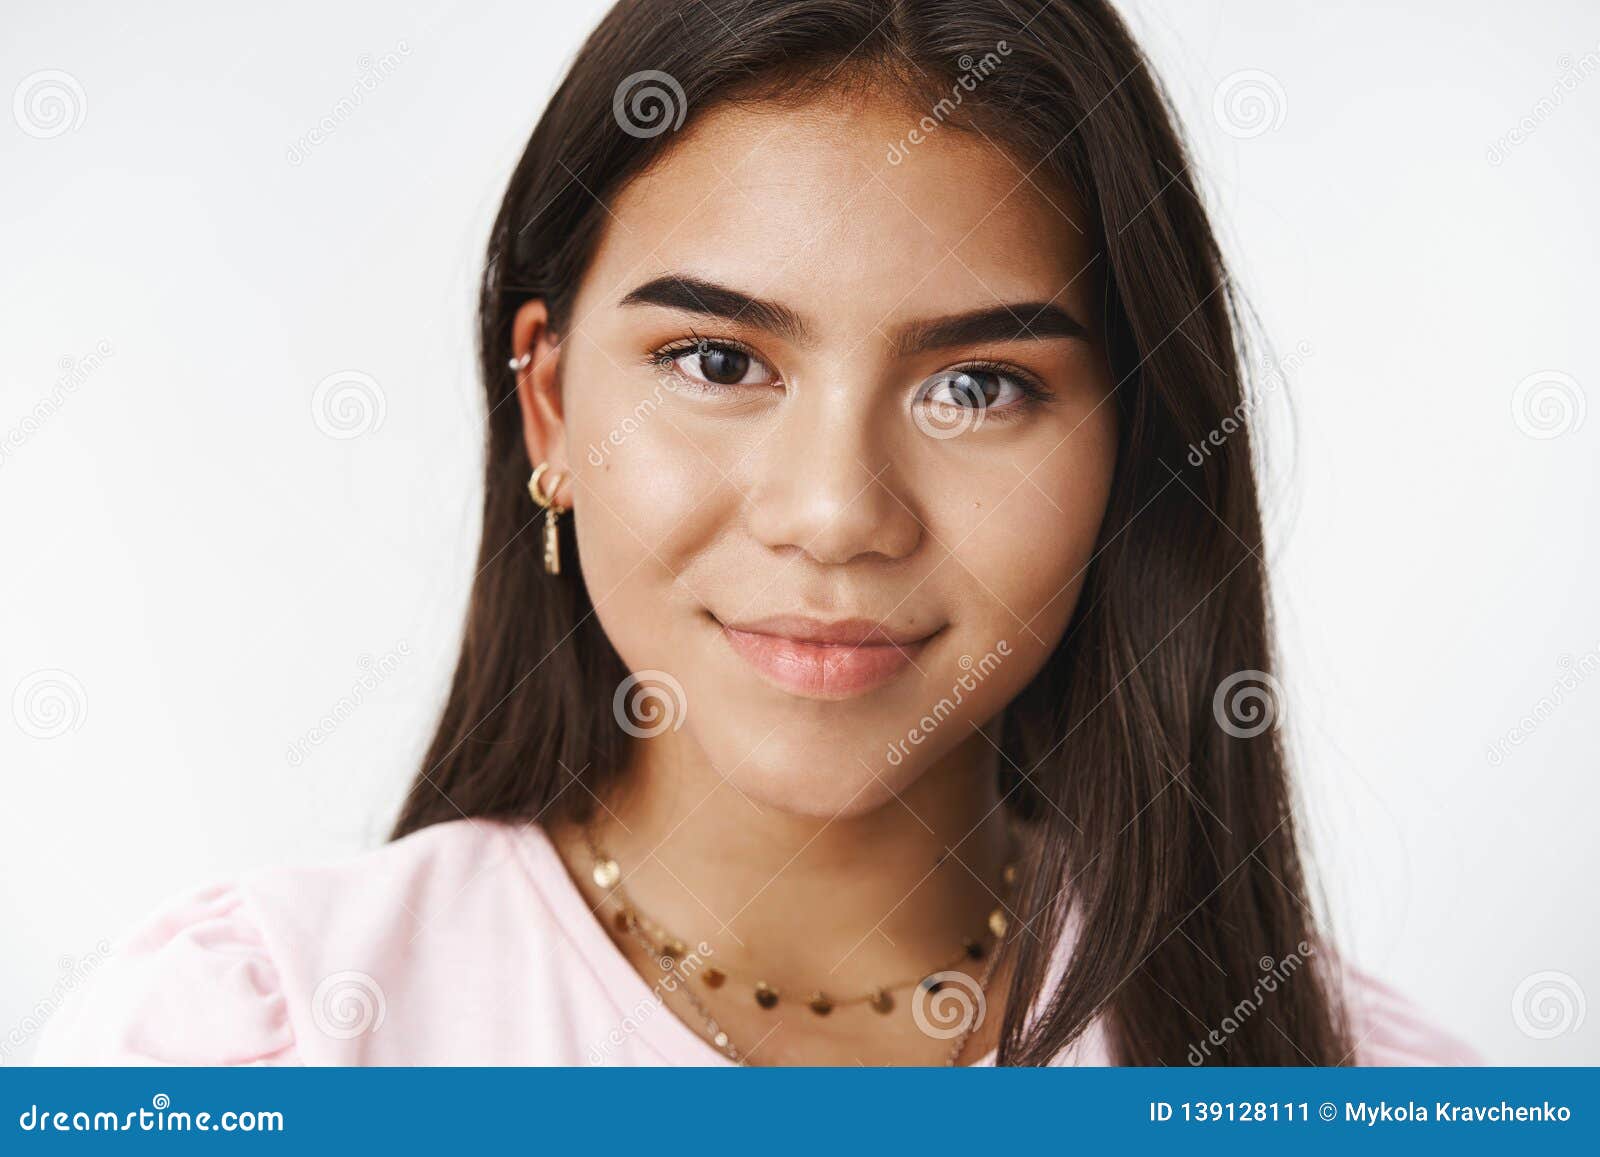 Indian Teen On Laptop Pictures, Images and Stock Photos